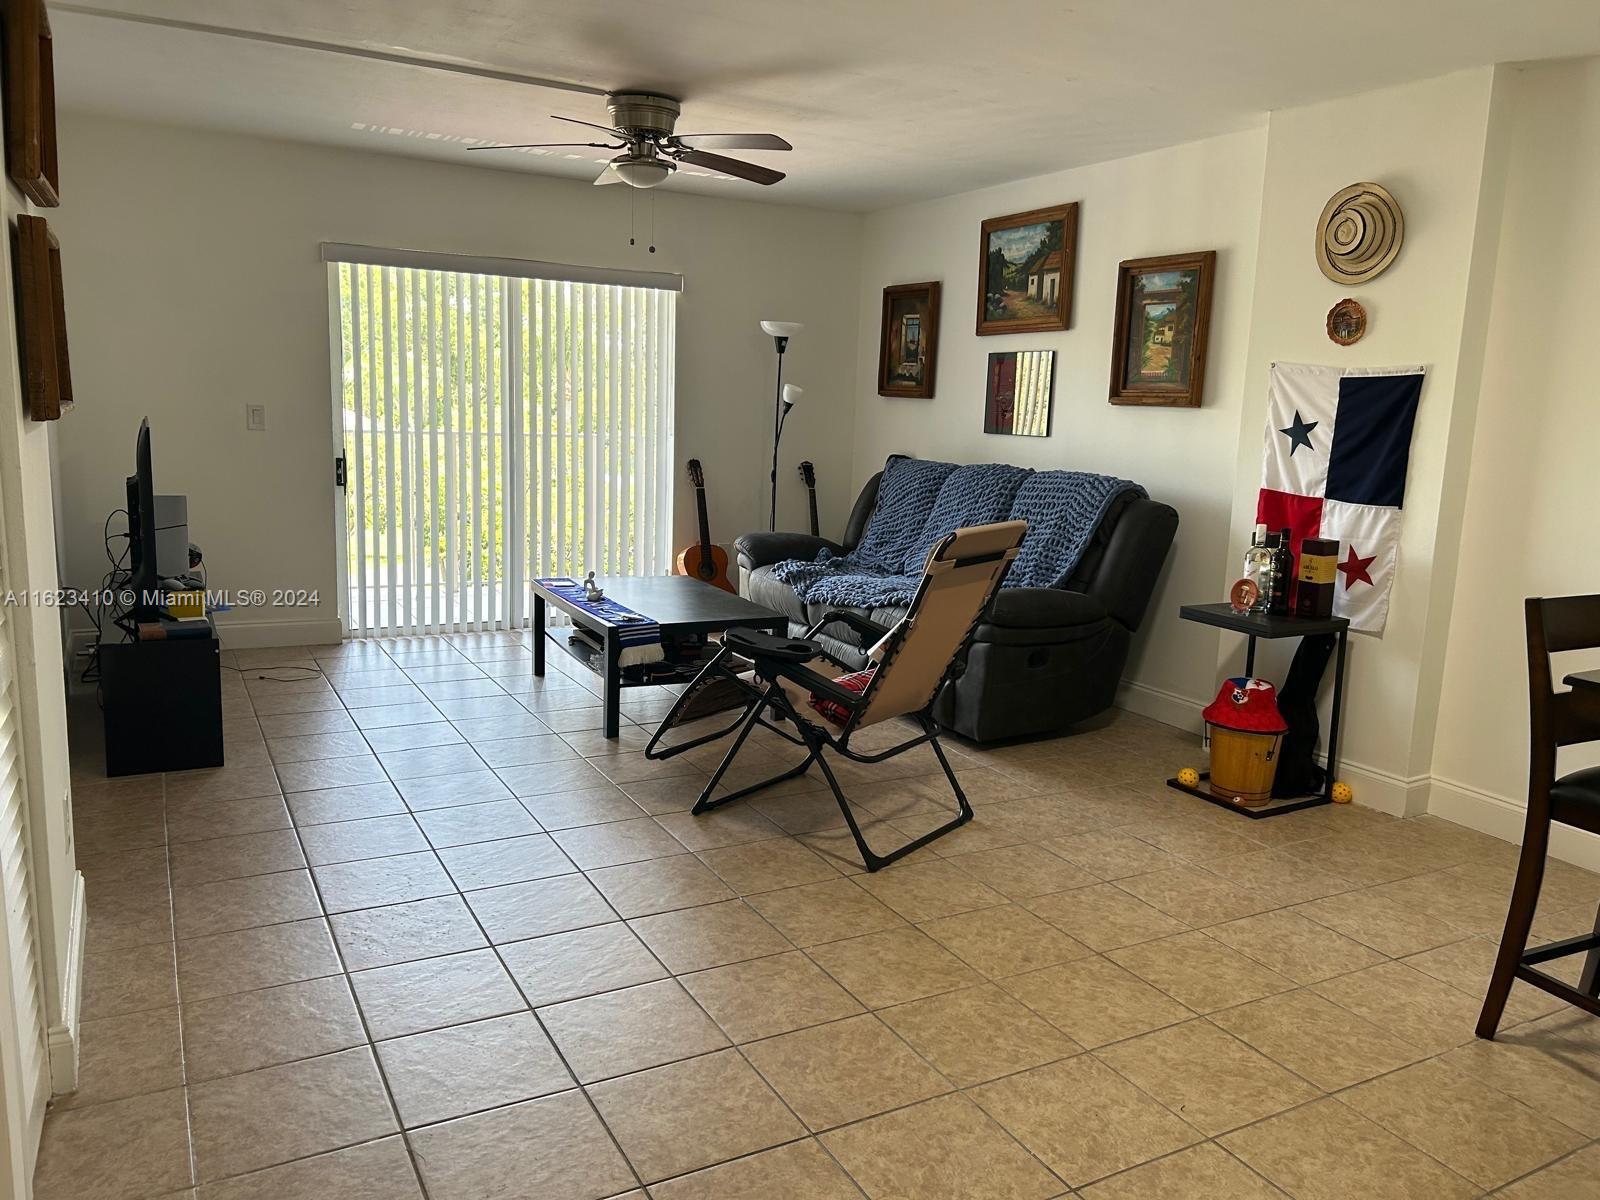 Spacious 1/1 unit in good condition in the elegant area of Cutler Bay.   Unit is equipped with stainless-steel appliances and is located in a gated community, one assigned parking space, visitors' parking spaces, swimming pool, tennis court, barbecue area, gym, laundry facility and clubhouse. The association includes water, waste, and maintenance of the common areas. Great location east of Old Cutler Rd. close to Lakes by the Bay Park, Black Point Marina, supermarket, restaurants, and banks.  A Must See.